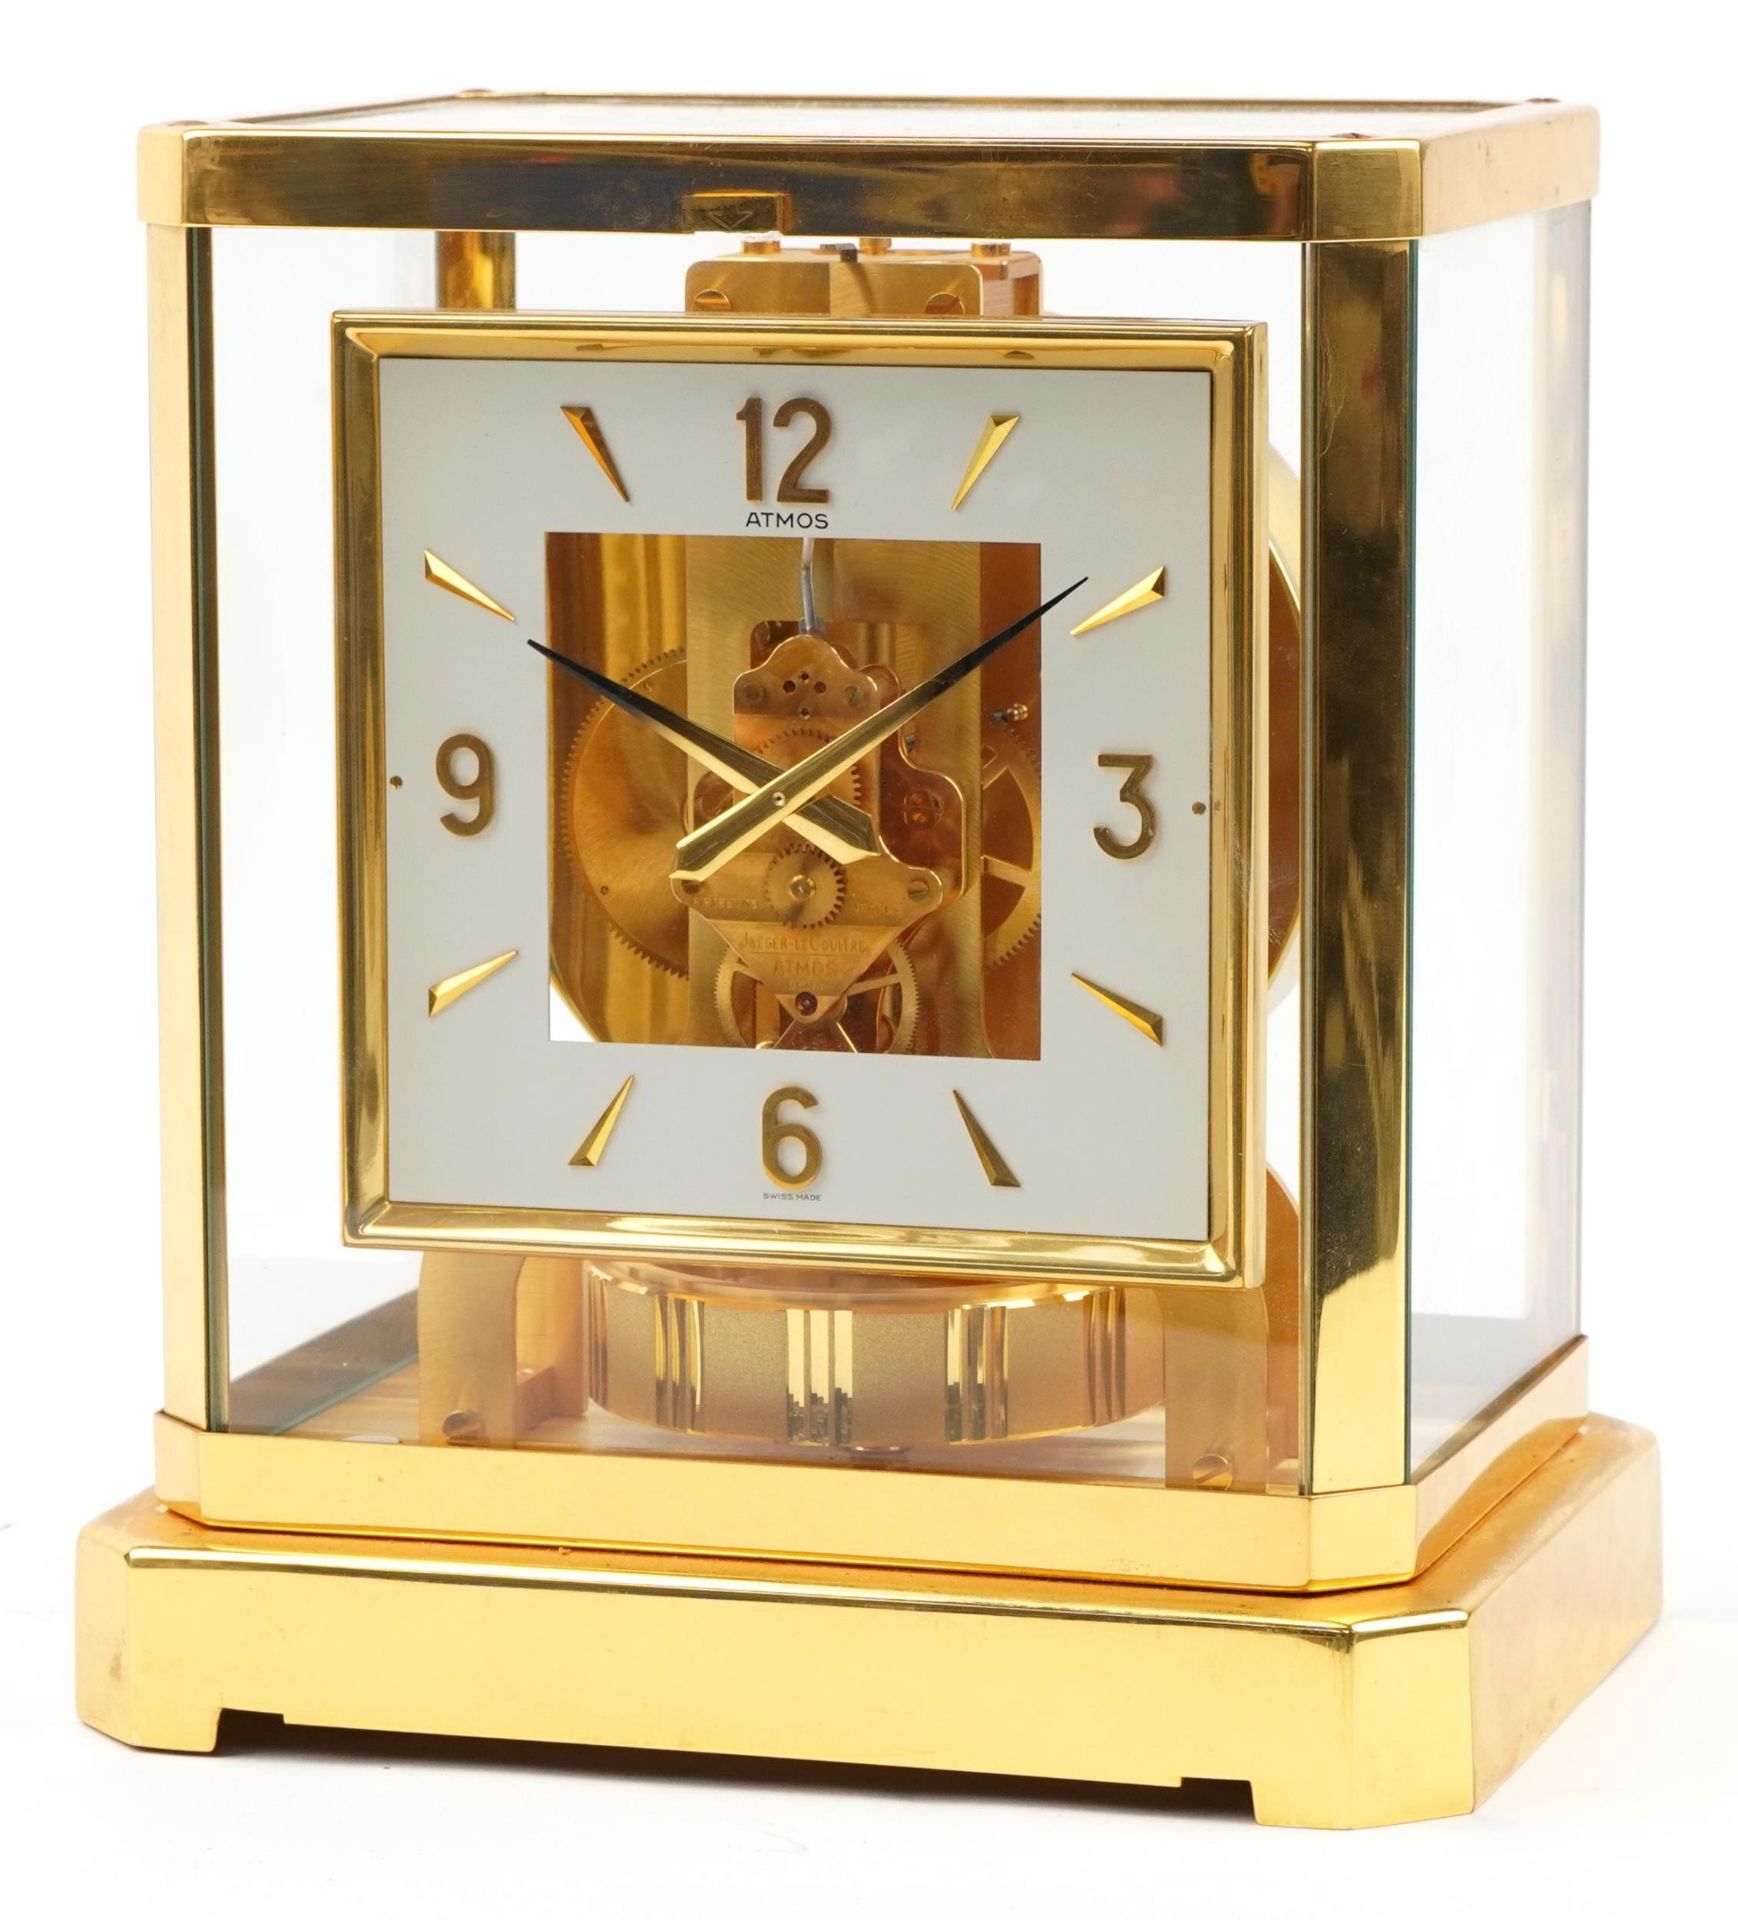 Jaeger LeCoultre brass cased Atmos clock, 23.5cm H x 20.5cm W x 17cm D : For further information